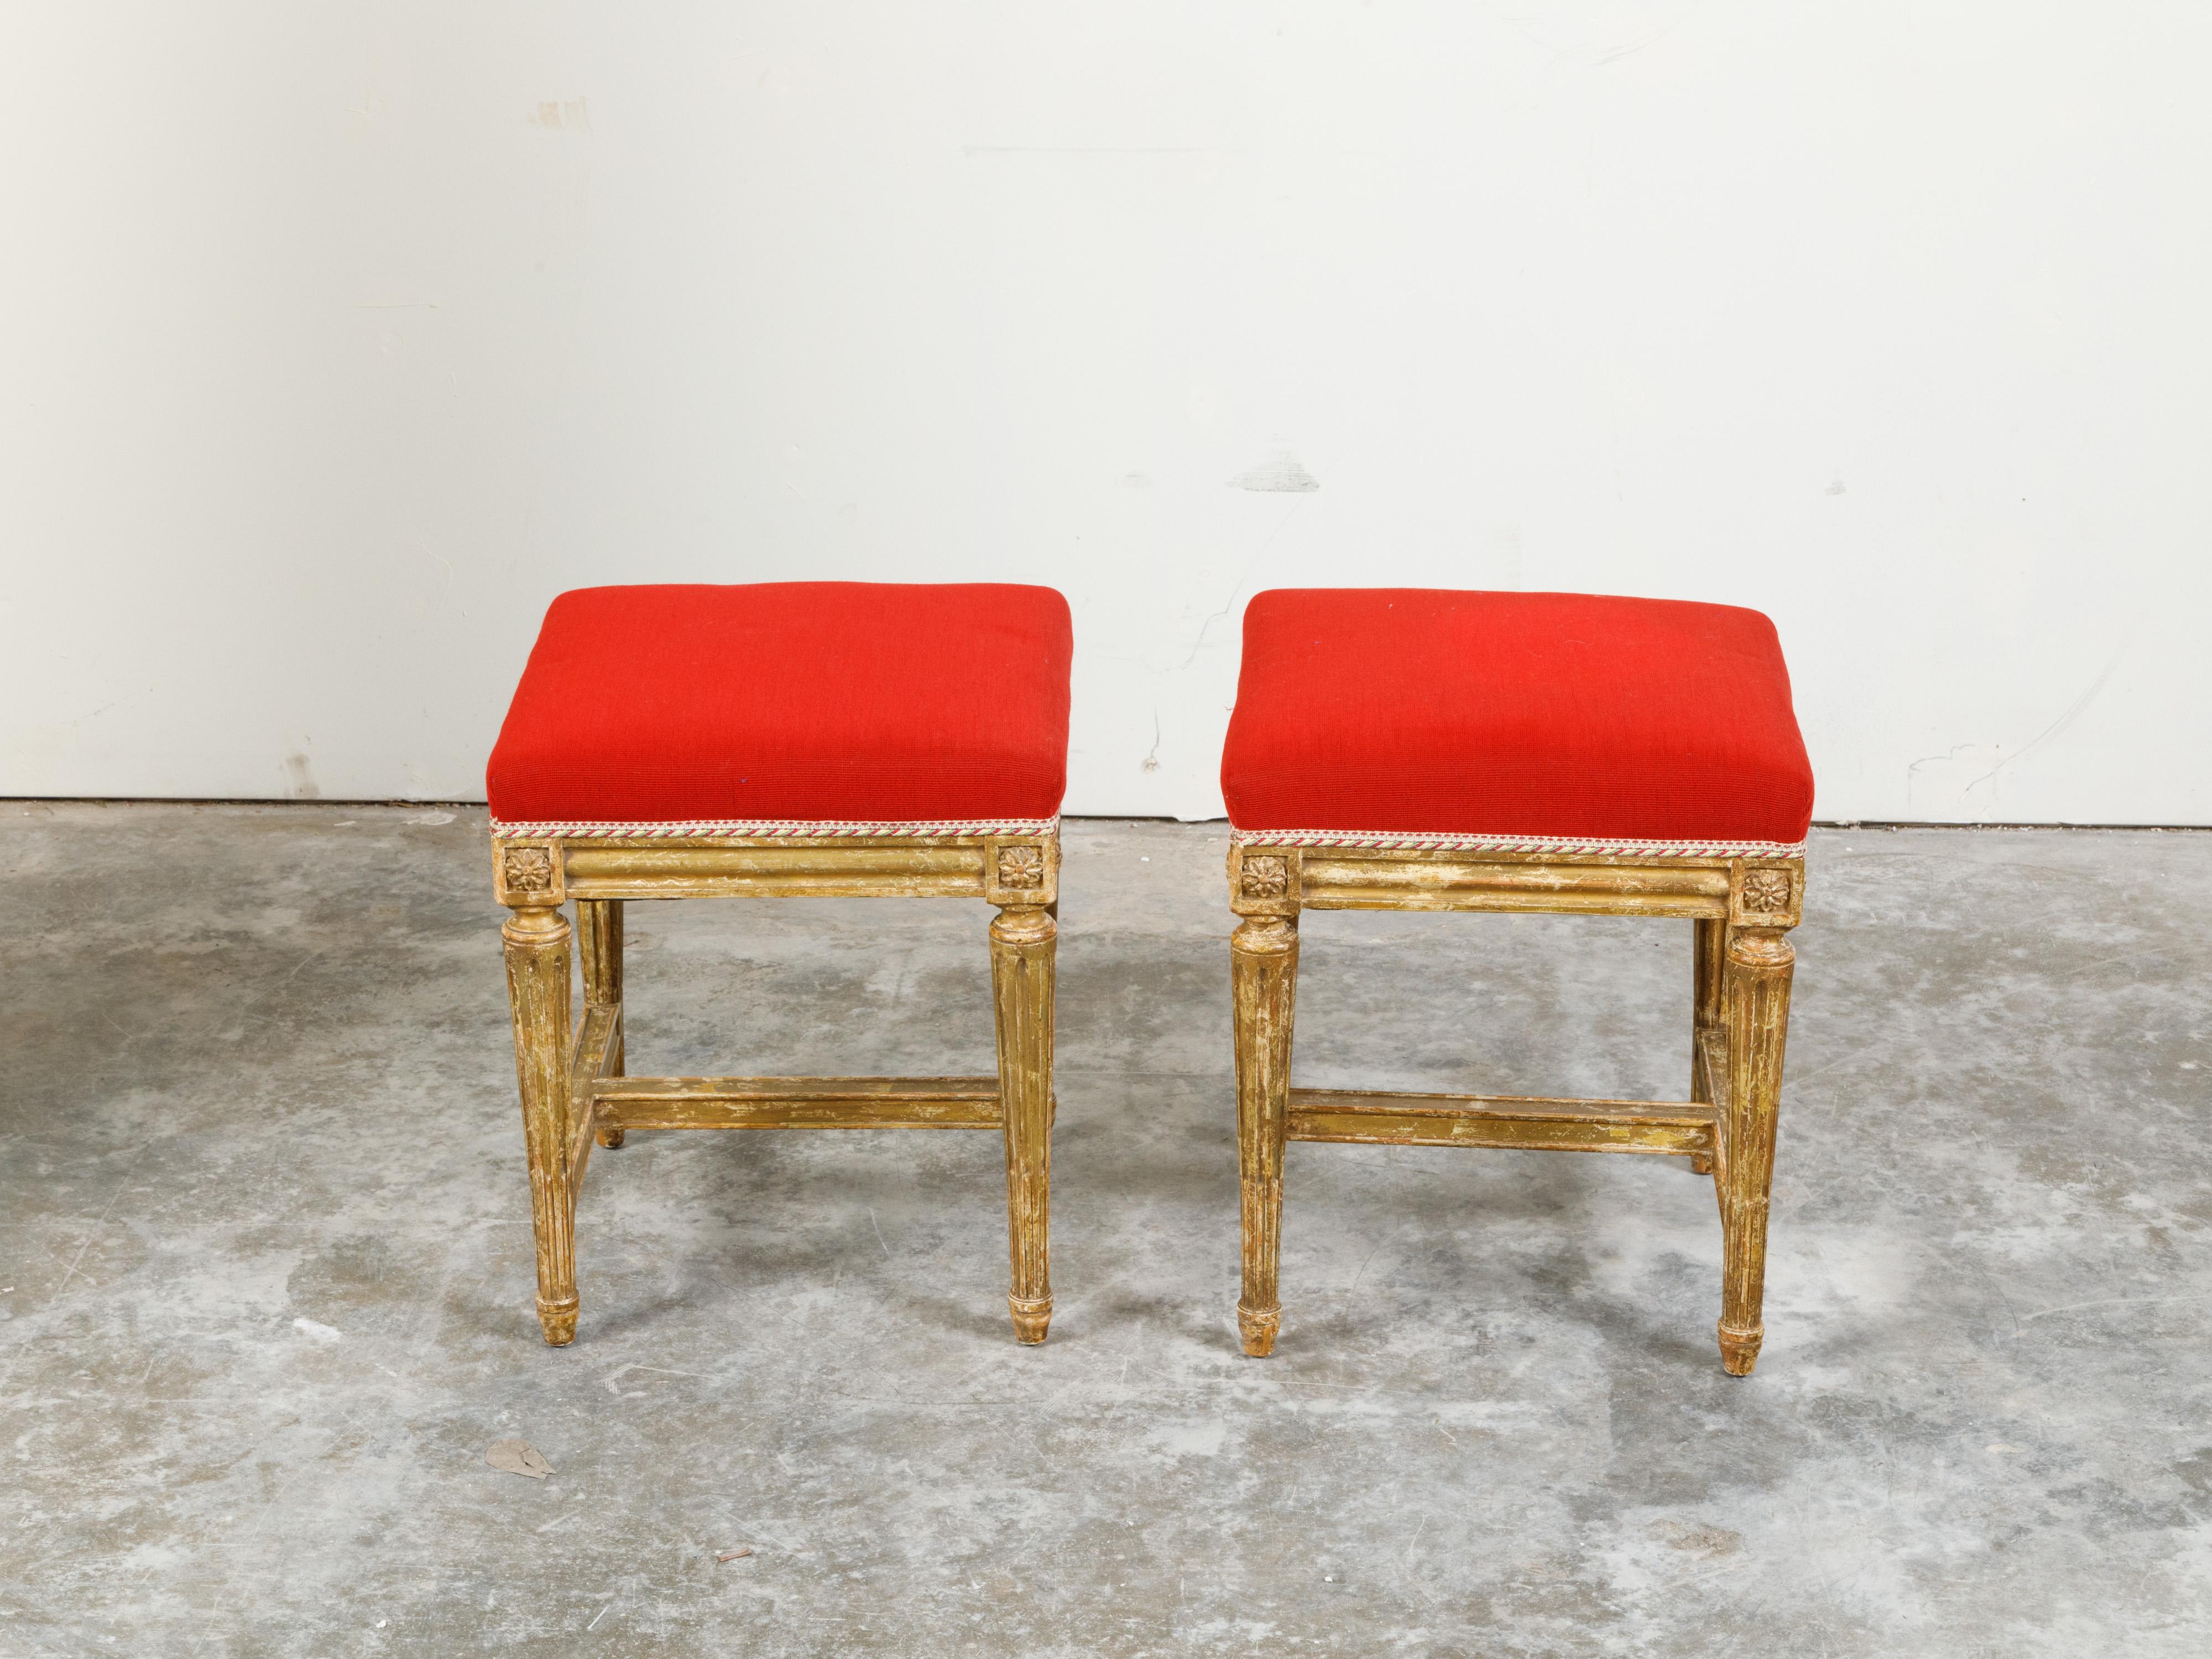 Pair of Neoclassical Style 19th Century Painted Stools with Red Upholstery For Sale 1